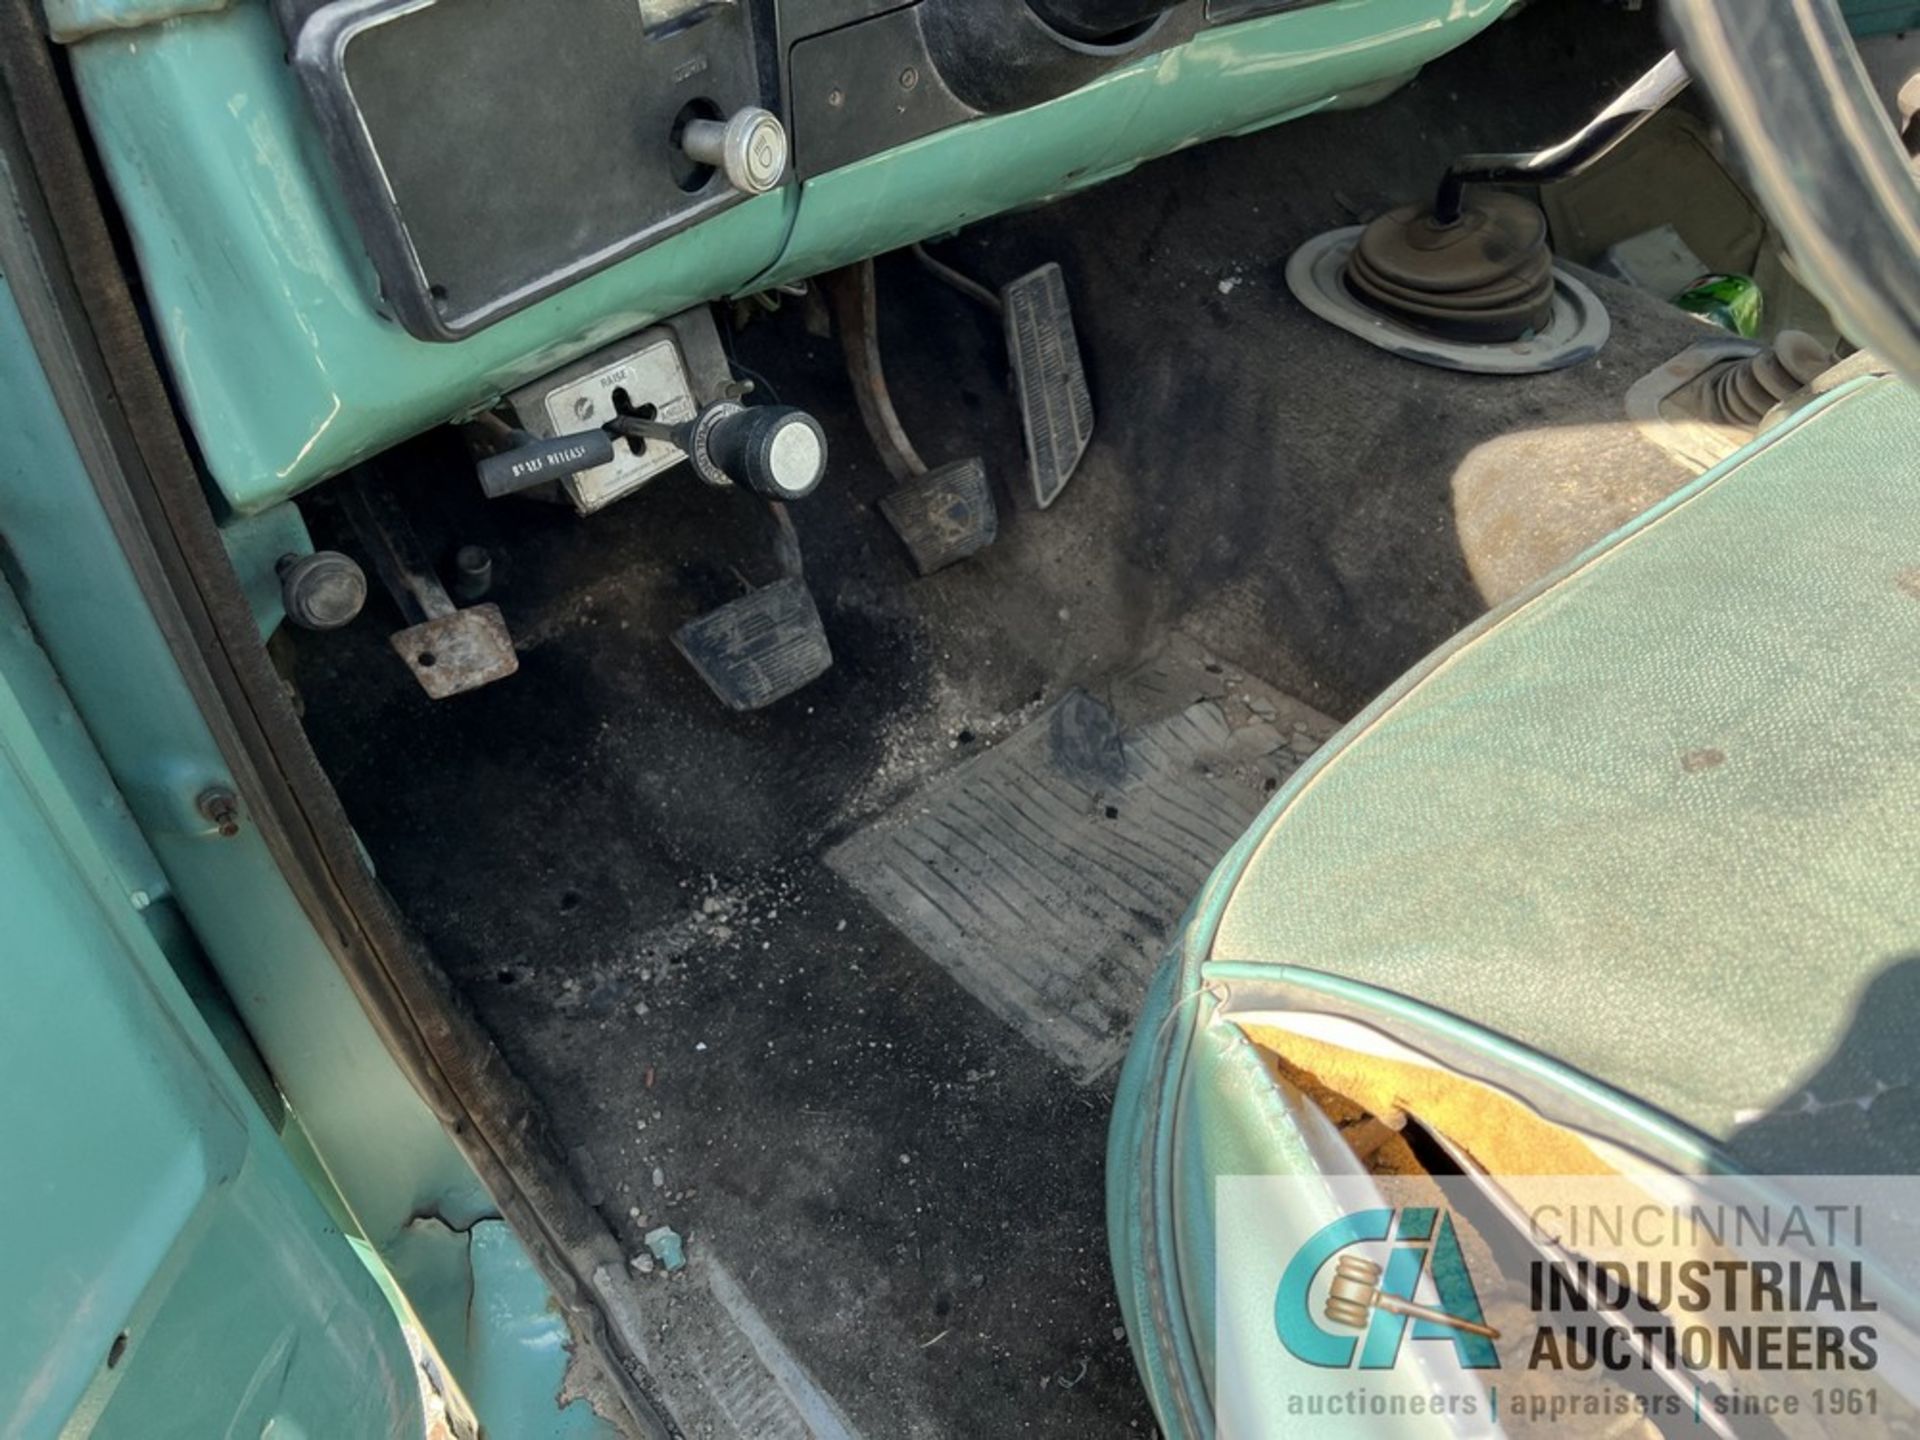 1978 CHEVY CUSTOM DELUX 2 WITH SNOW PLOW; VIN CKU268F128647, GASOLINE ENGINE, AUTOMATIC - Image 7 of 10